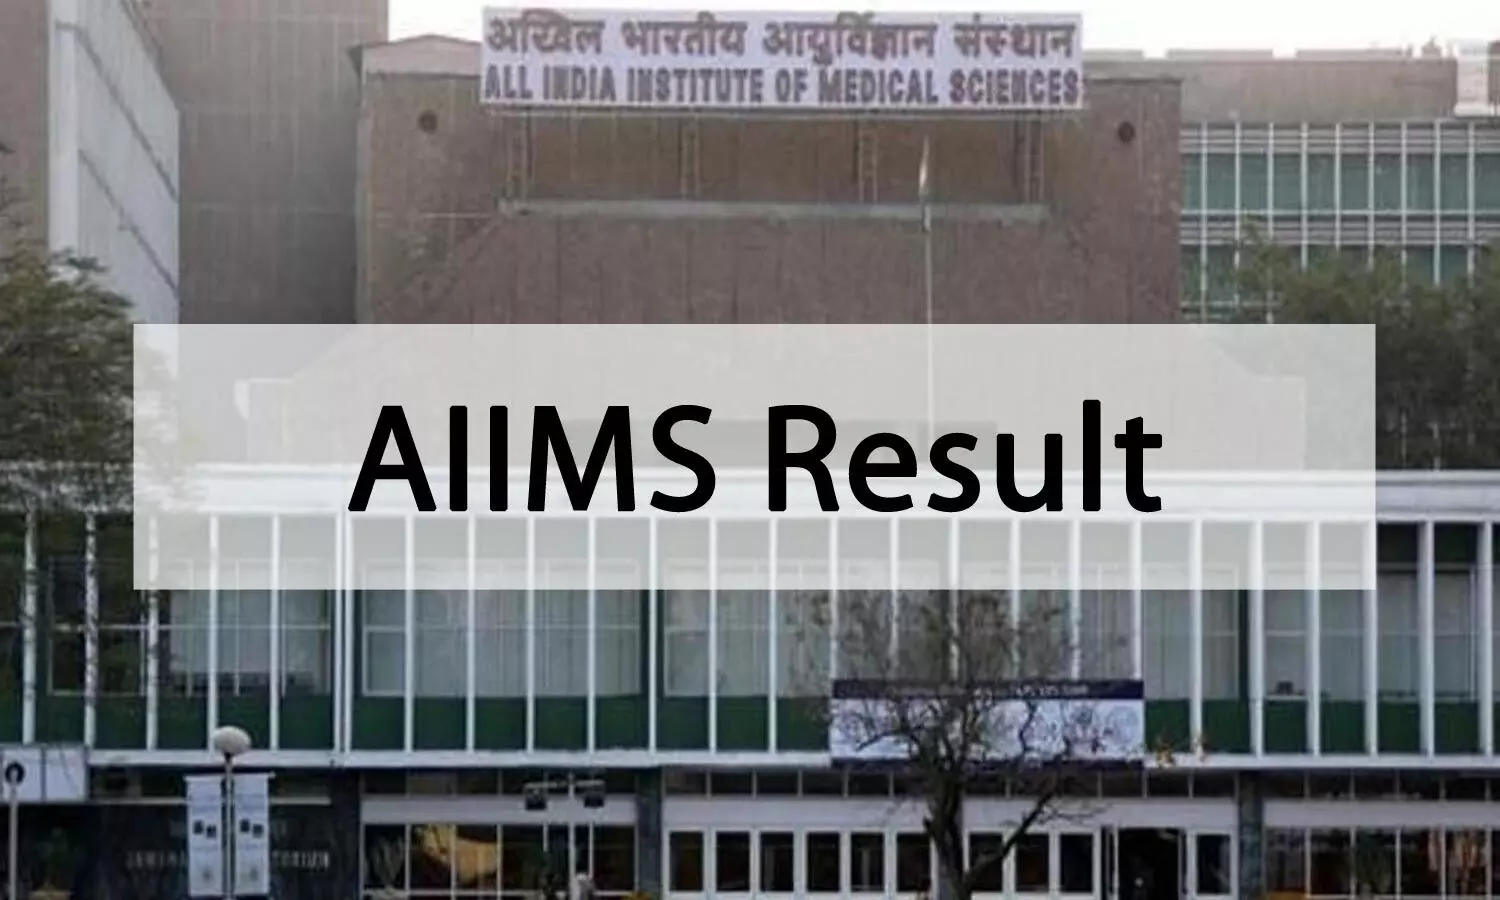 MSc Nursing 2020: AIIMS releases Round 1 Counselling results; Details